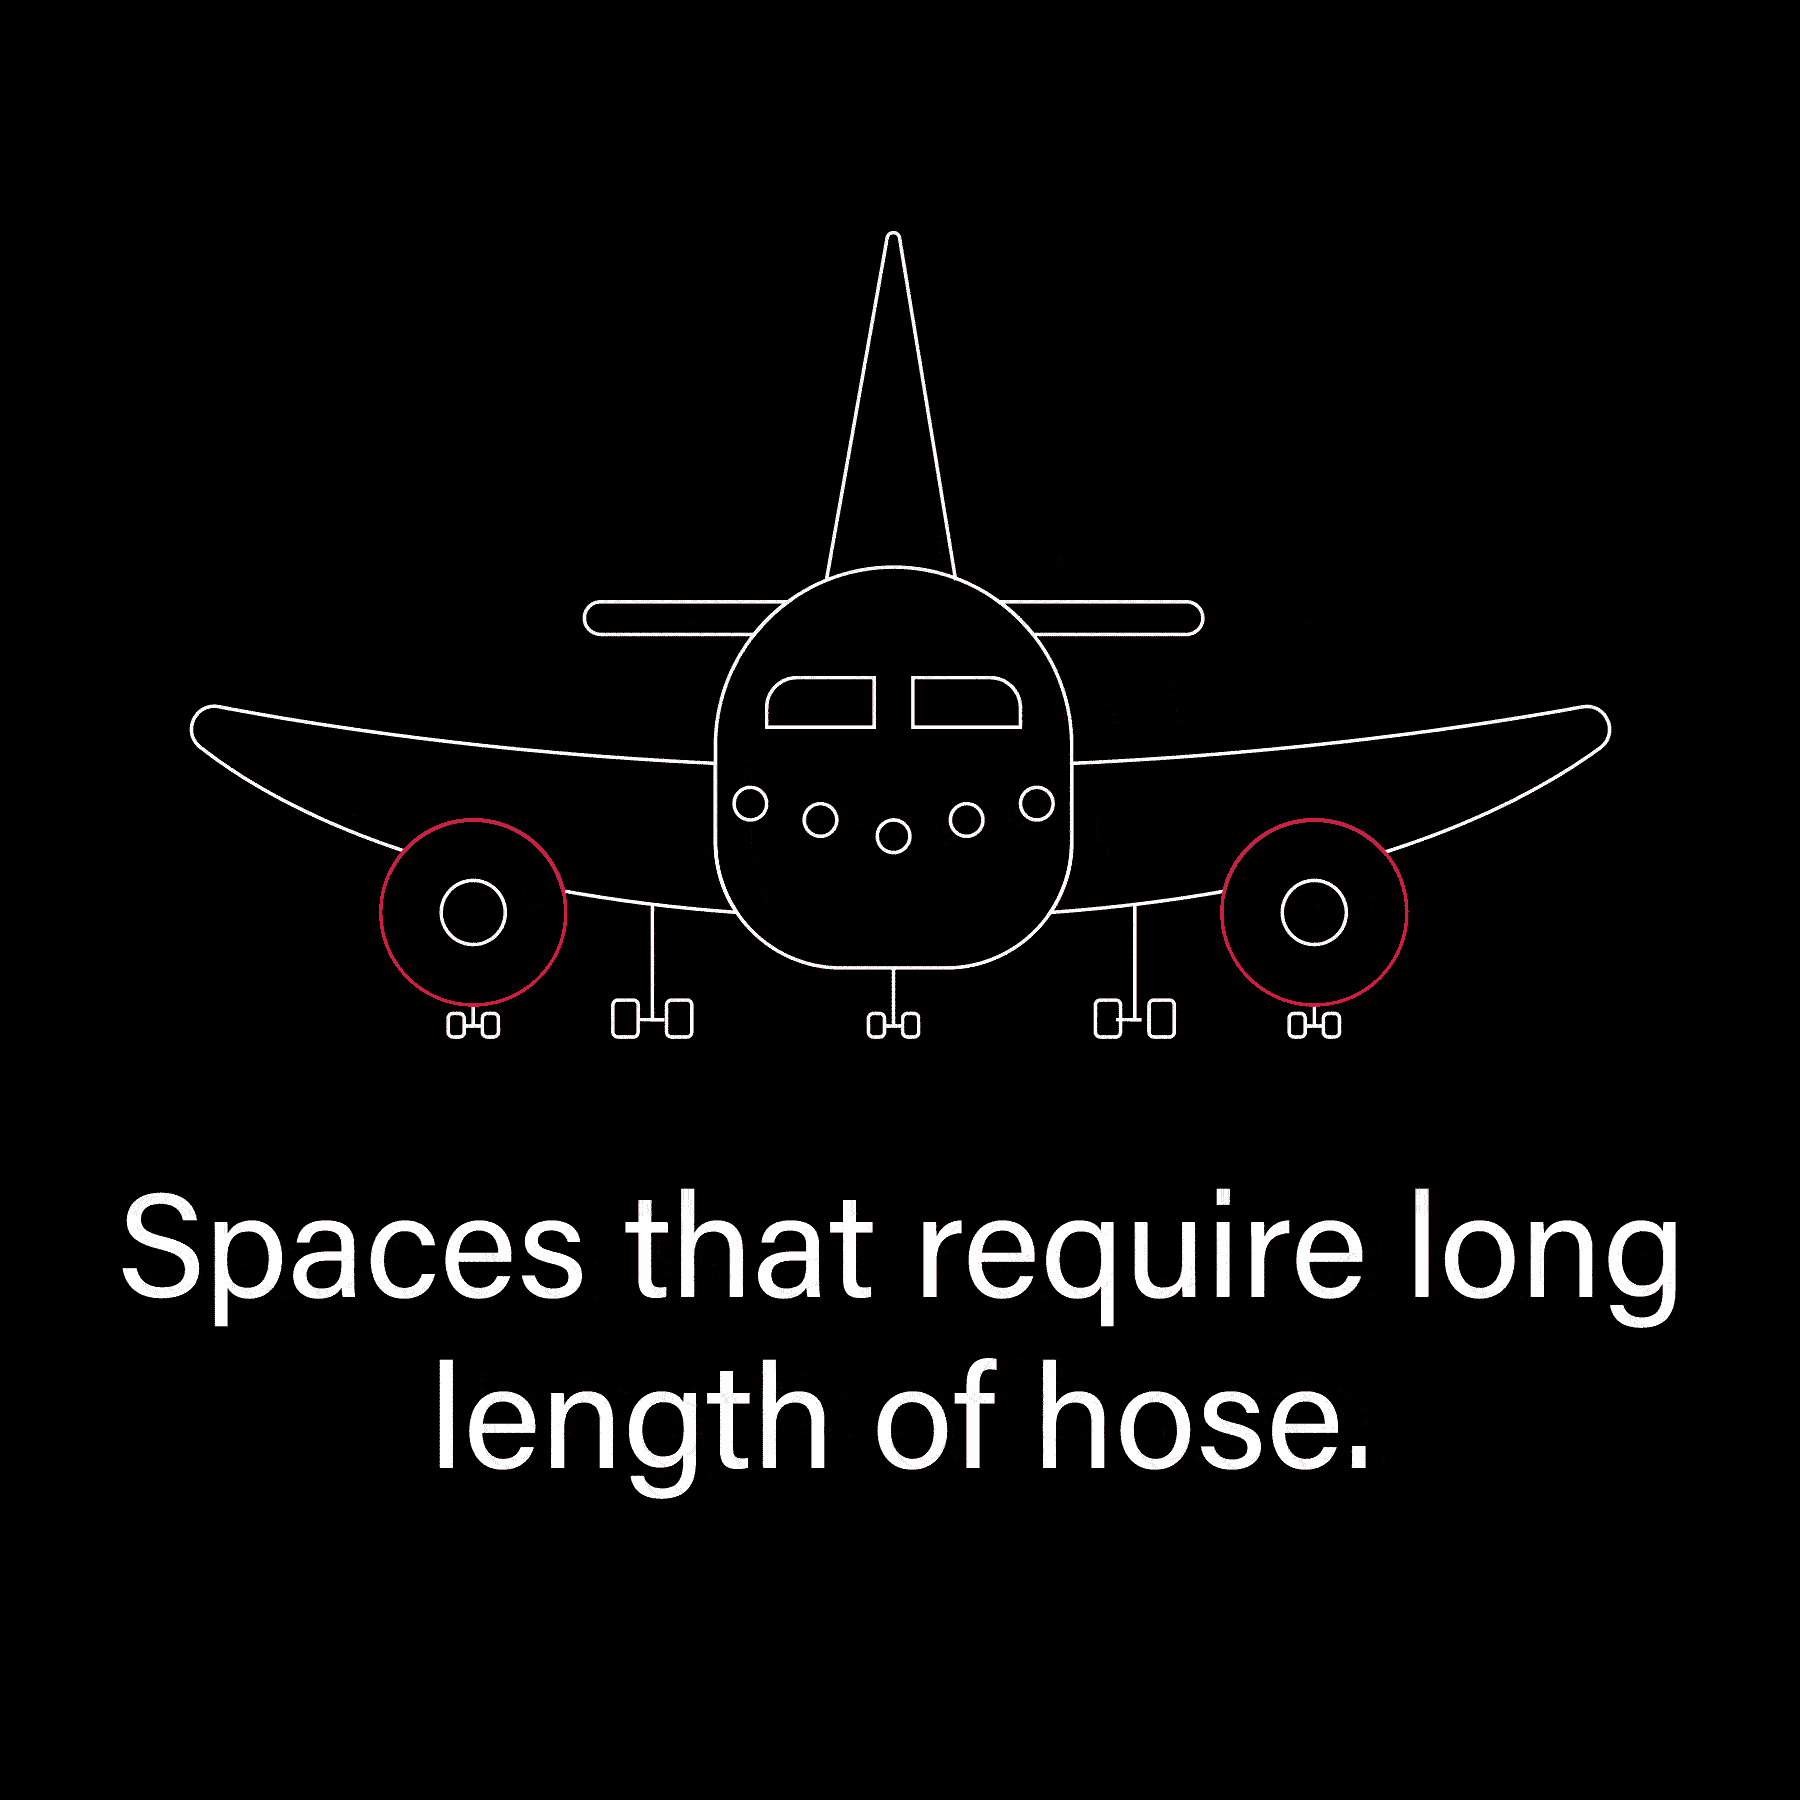 Spaces that require long length of hose